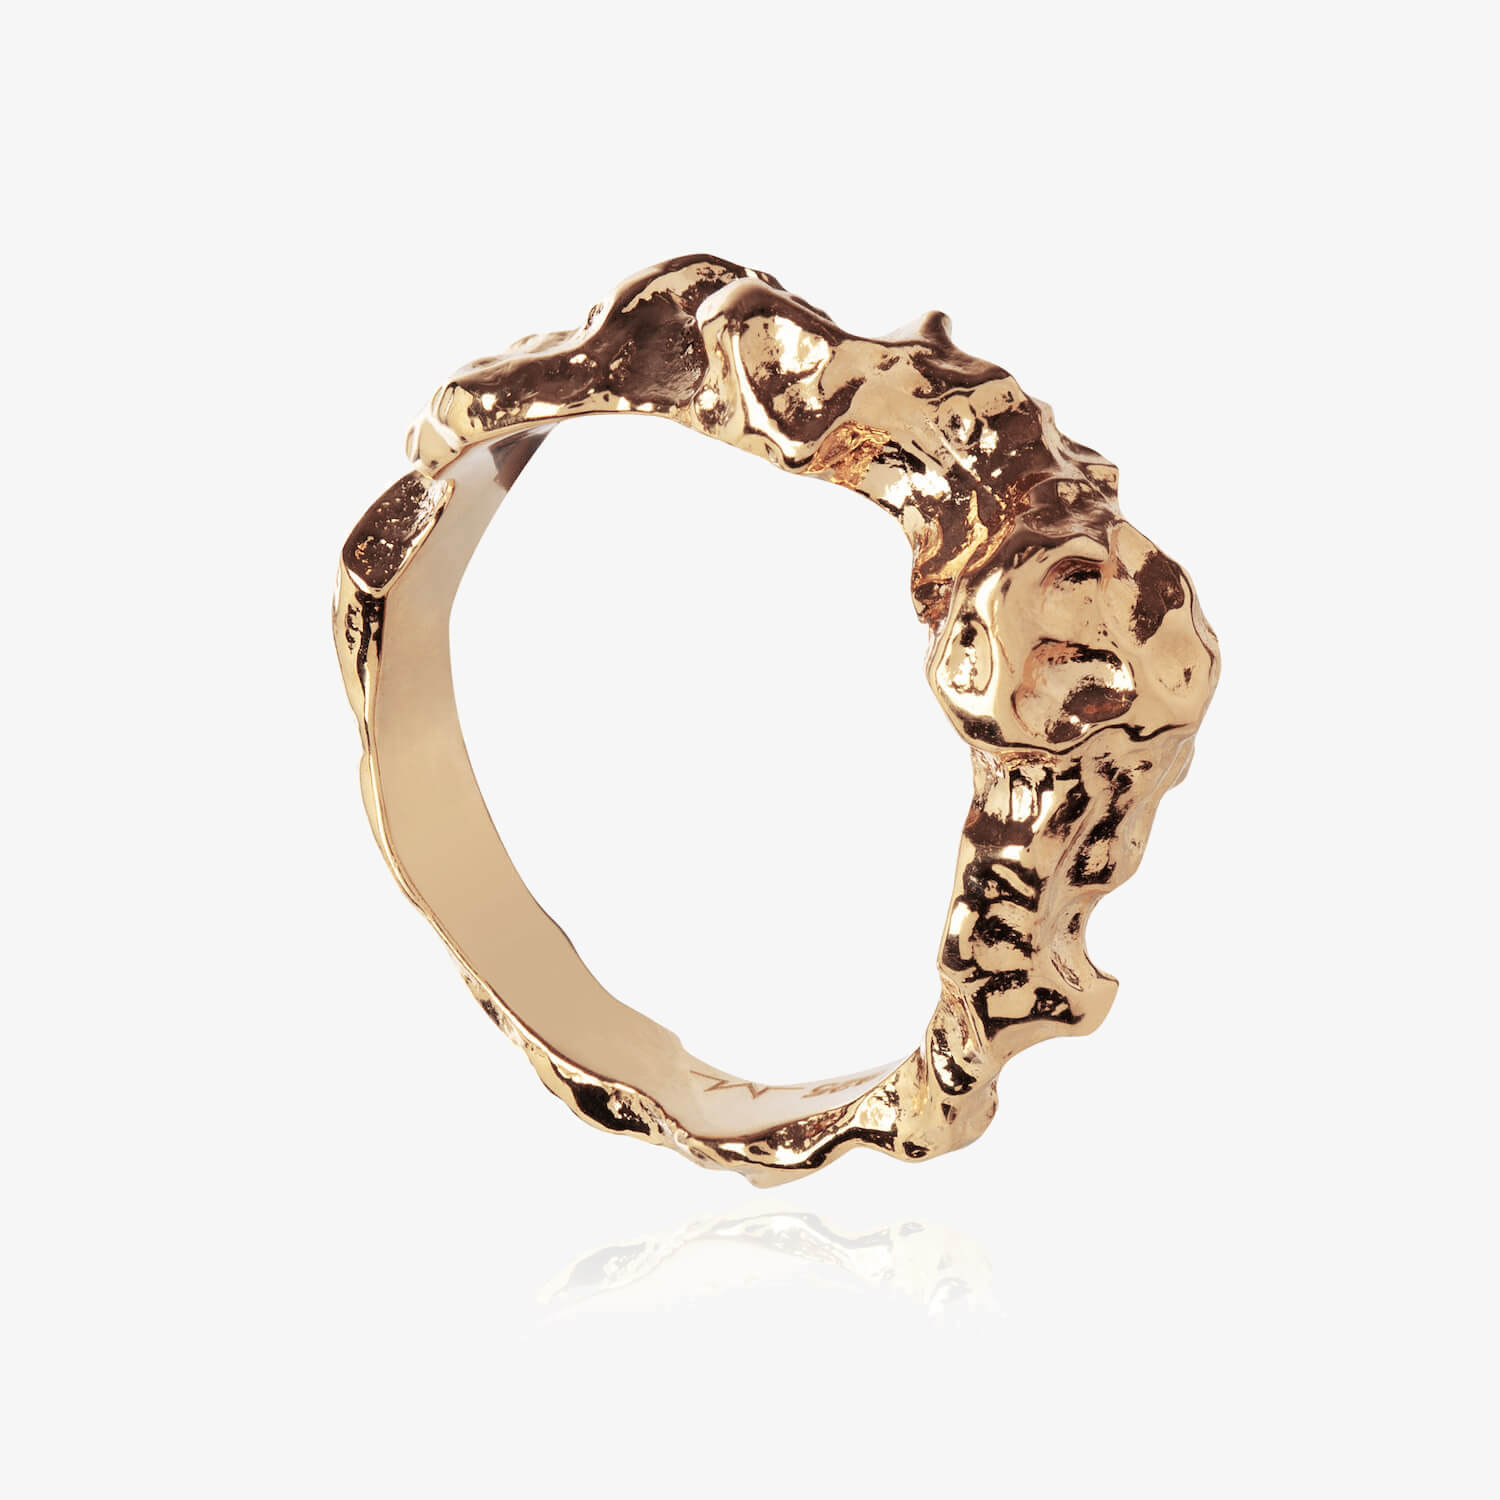 Meteor ring in rose gold with heavy detailing